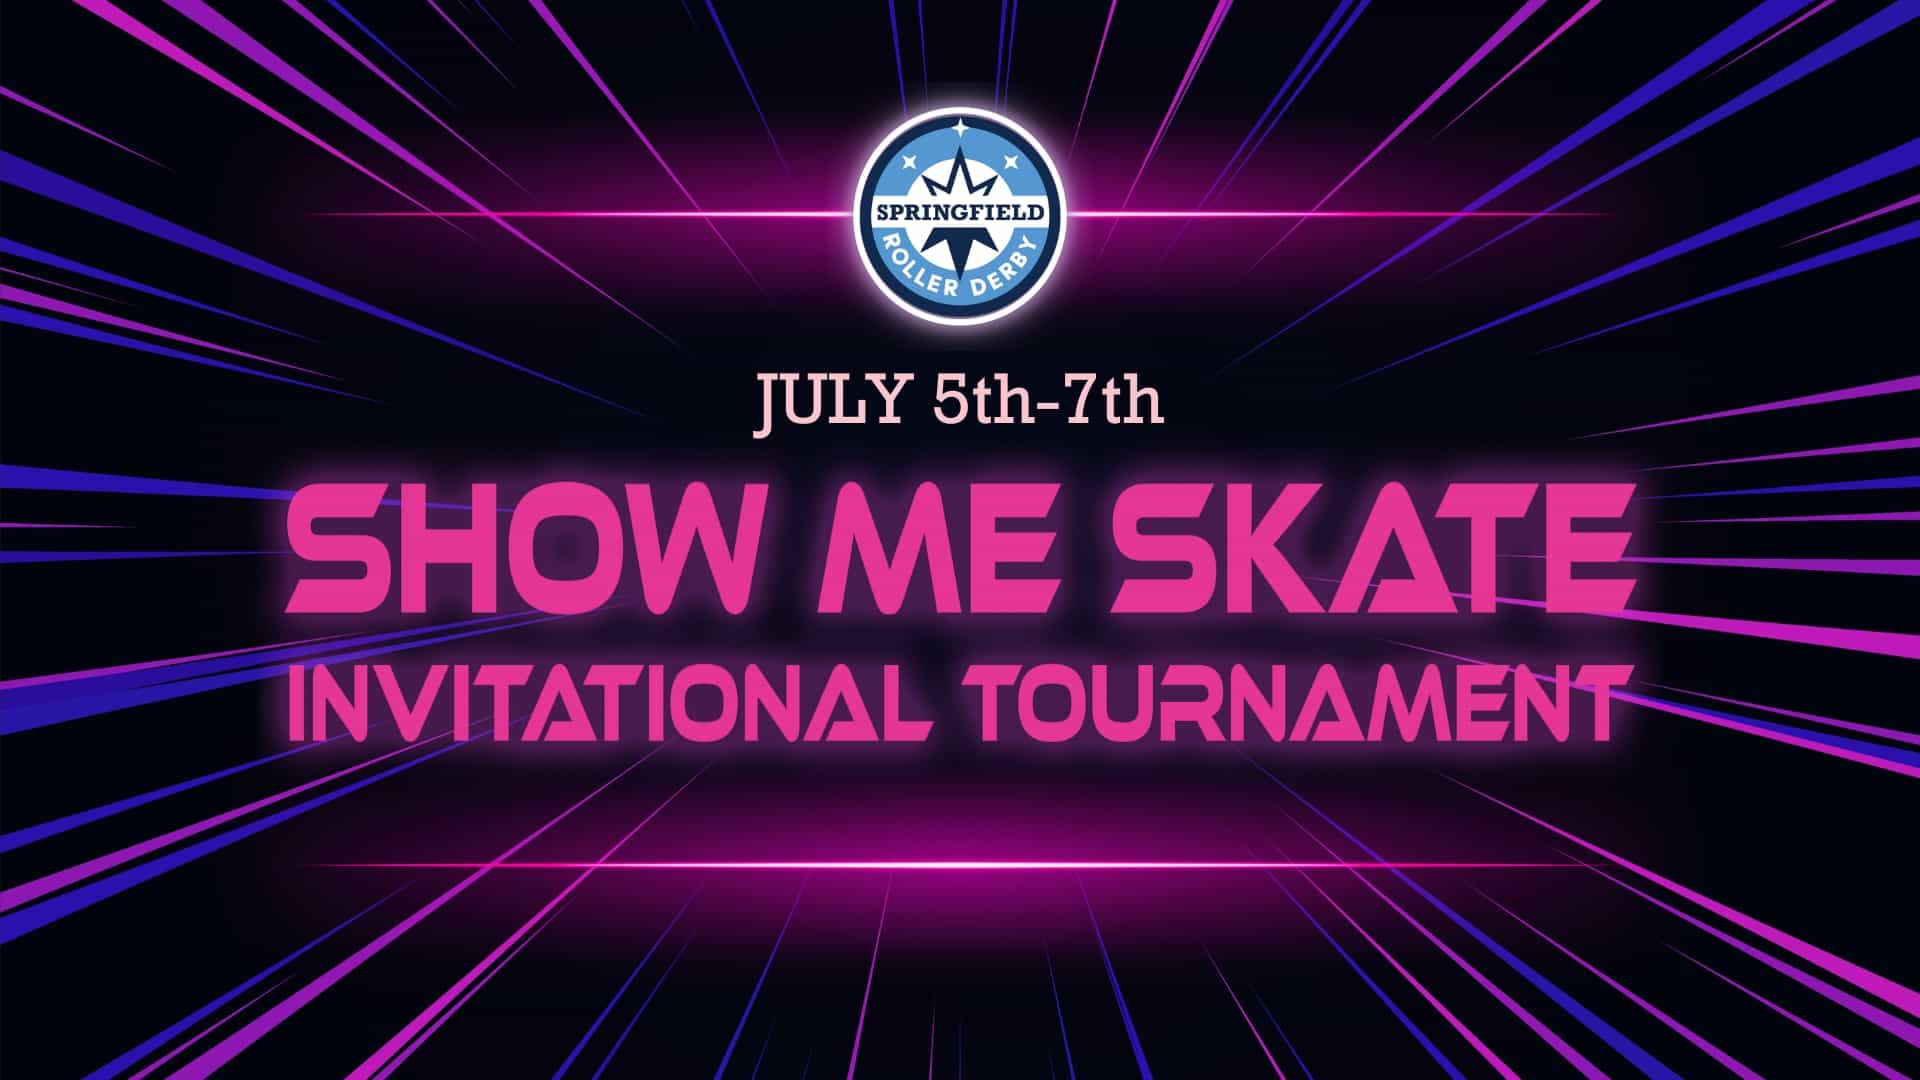 Image of black background with lasers and SRD logo. Text reads July 5th-7th Show Me Skate Invitational Tournament